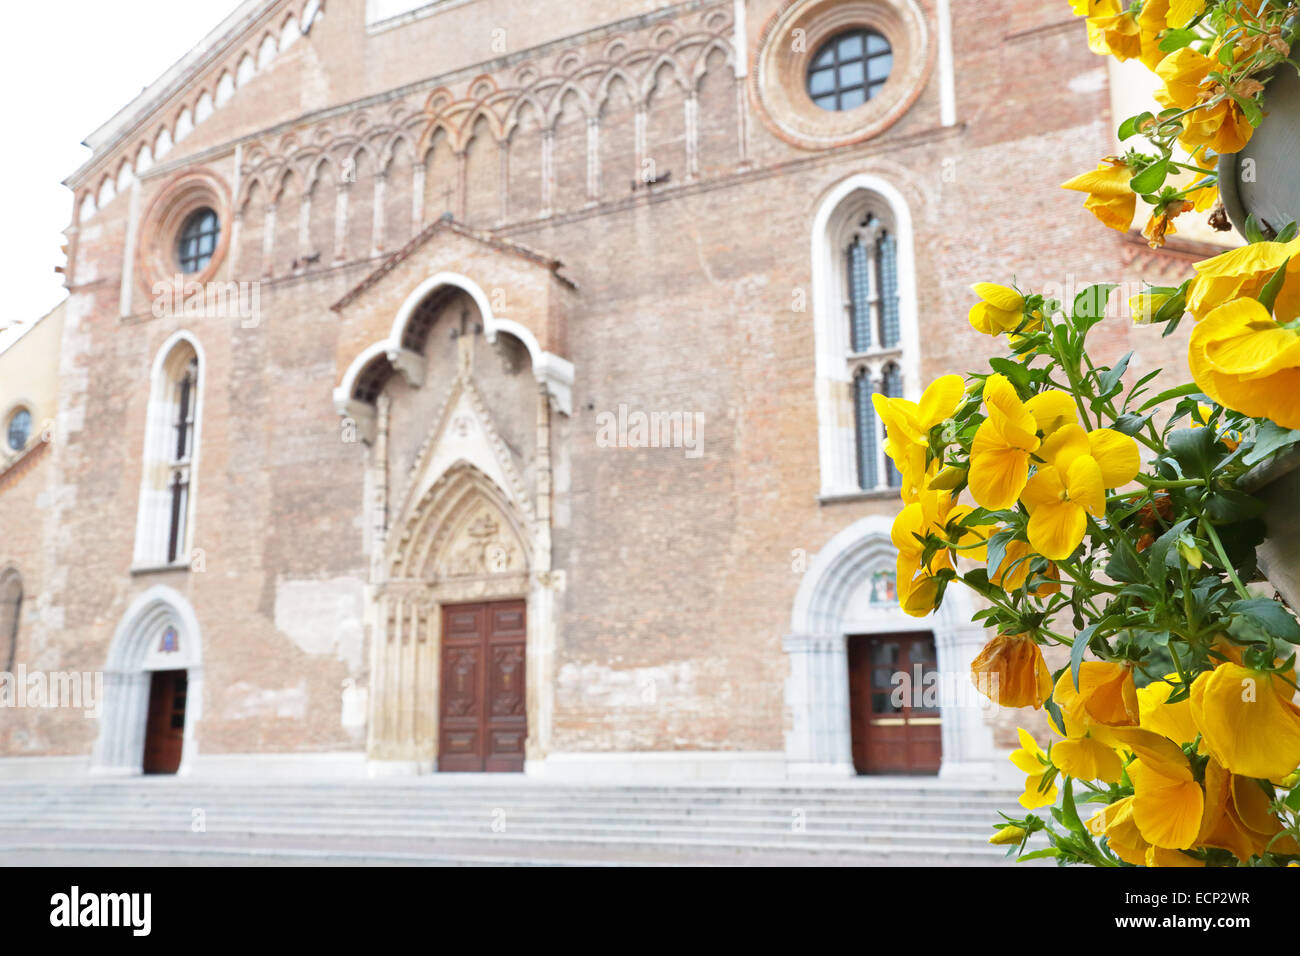 The roman Catholic Cathedral Santa Maria Maggiore of Udine, Italy, with yellow flowers in foreground Stock Photo